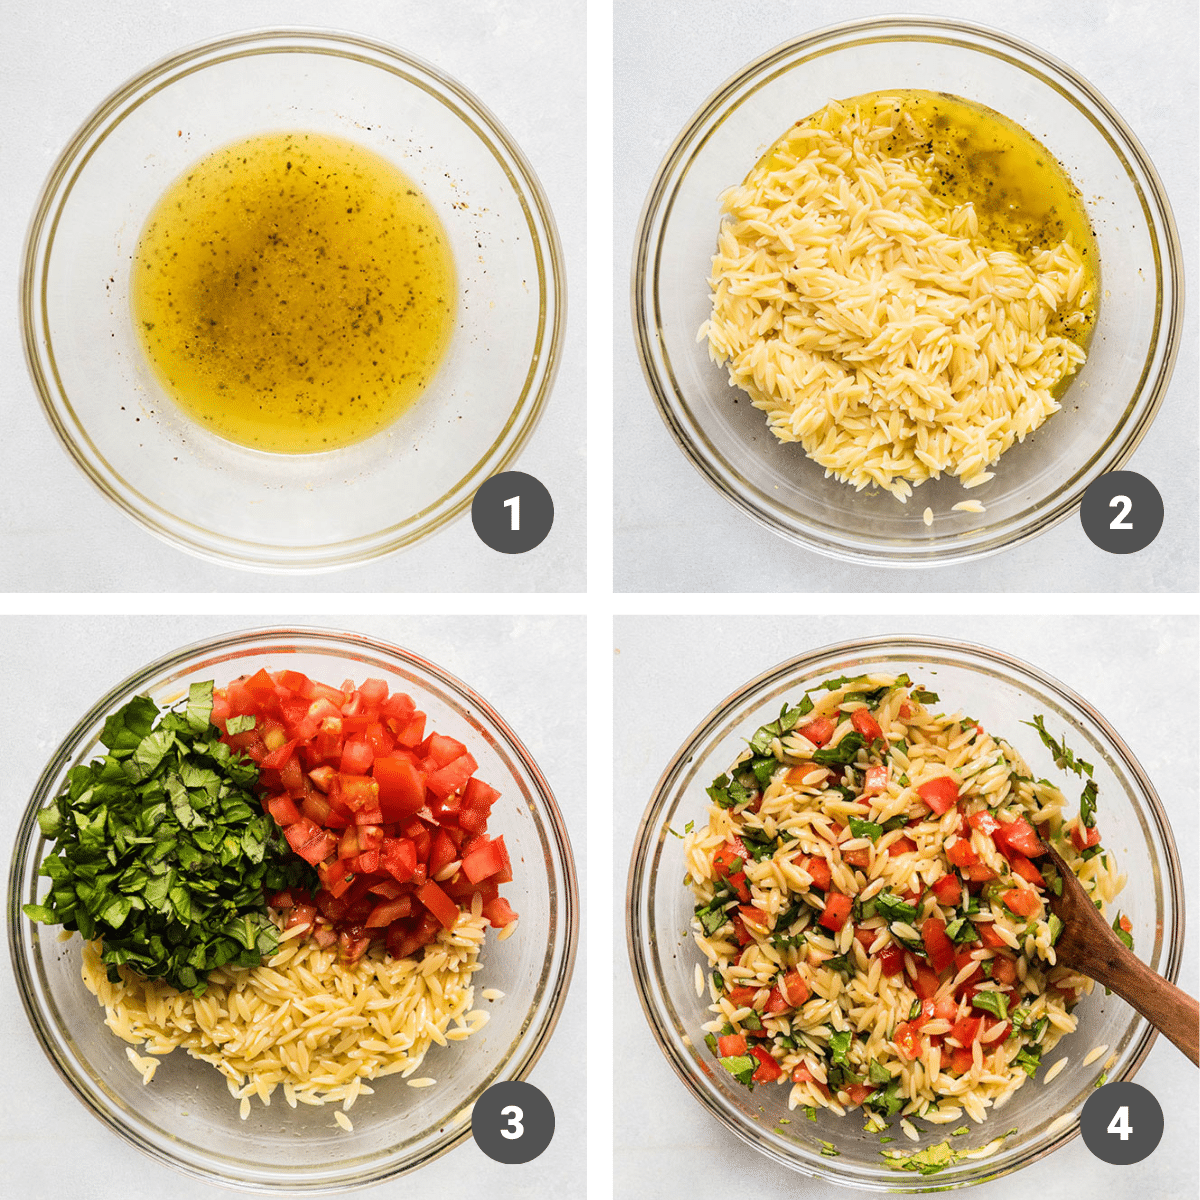 Stirring orzo salad ingredients together in a glass mixing bowl.